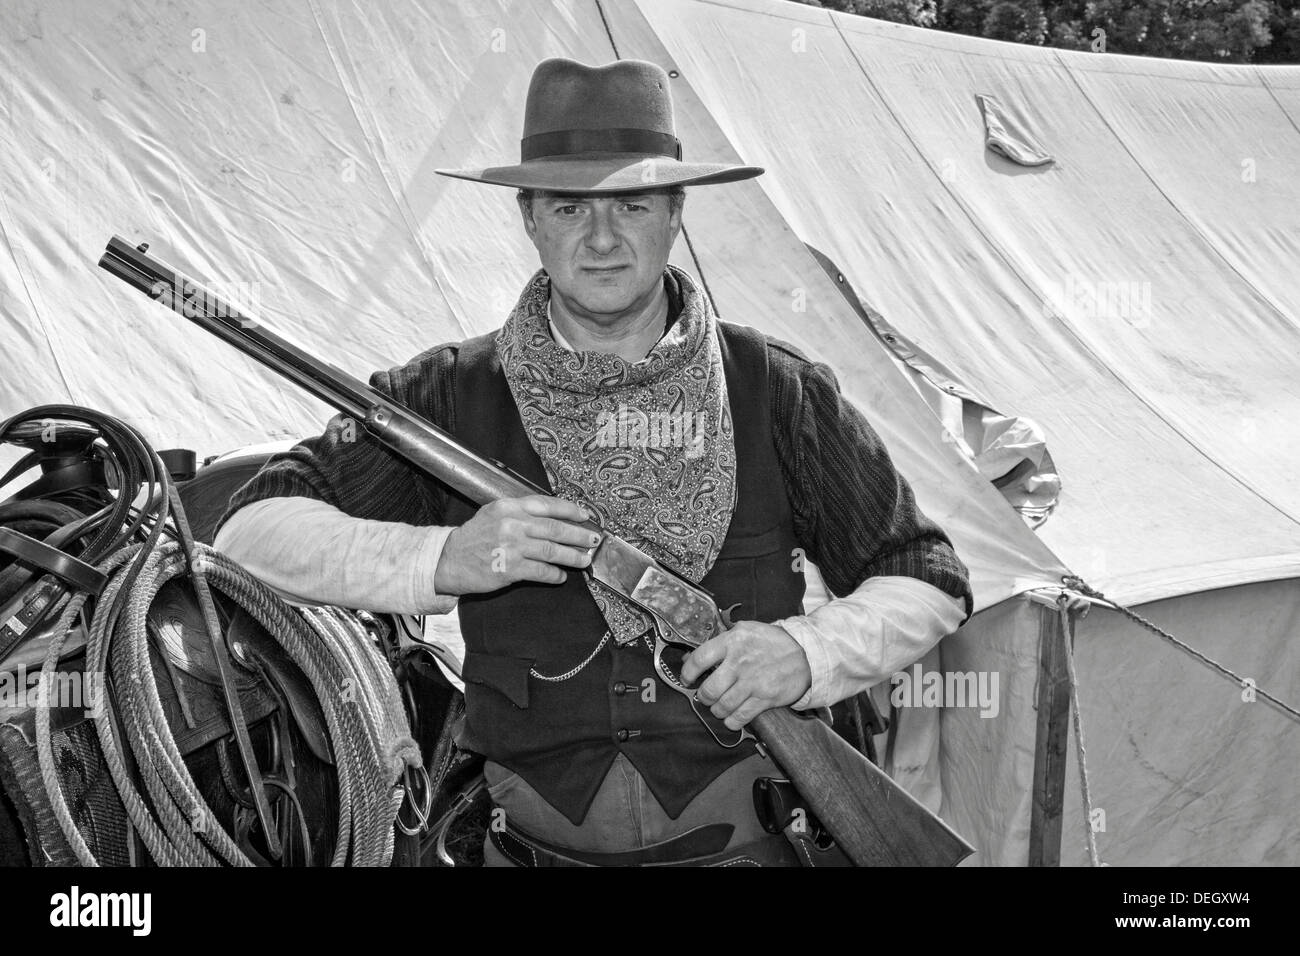 Armed Philip Twaites Cowboy, holding a breech-loading single-shot lever-actuated rifle gun used by the British Army at Ingleton's Wild West Weekend UK Stock Photo